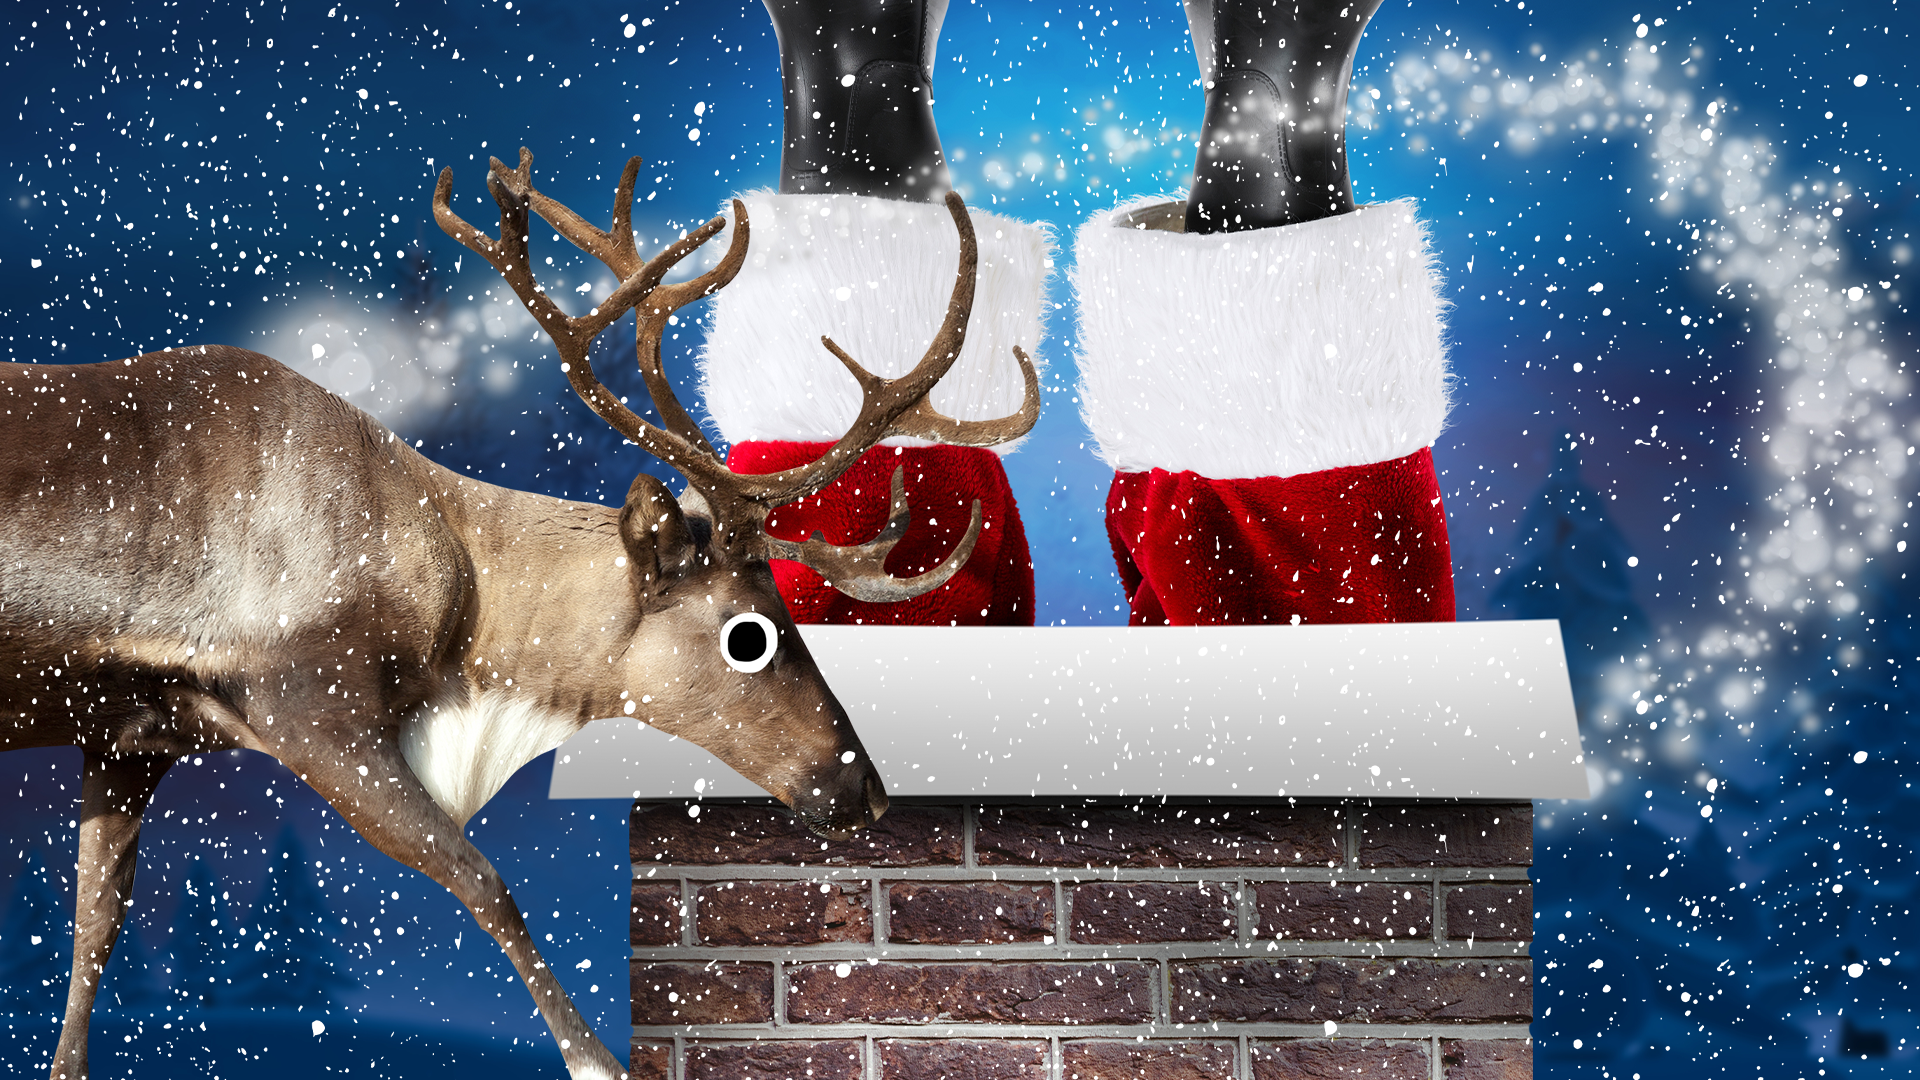 Beano reindeer and Santa stuck in chimney with snow